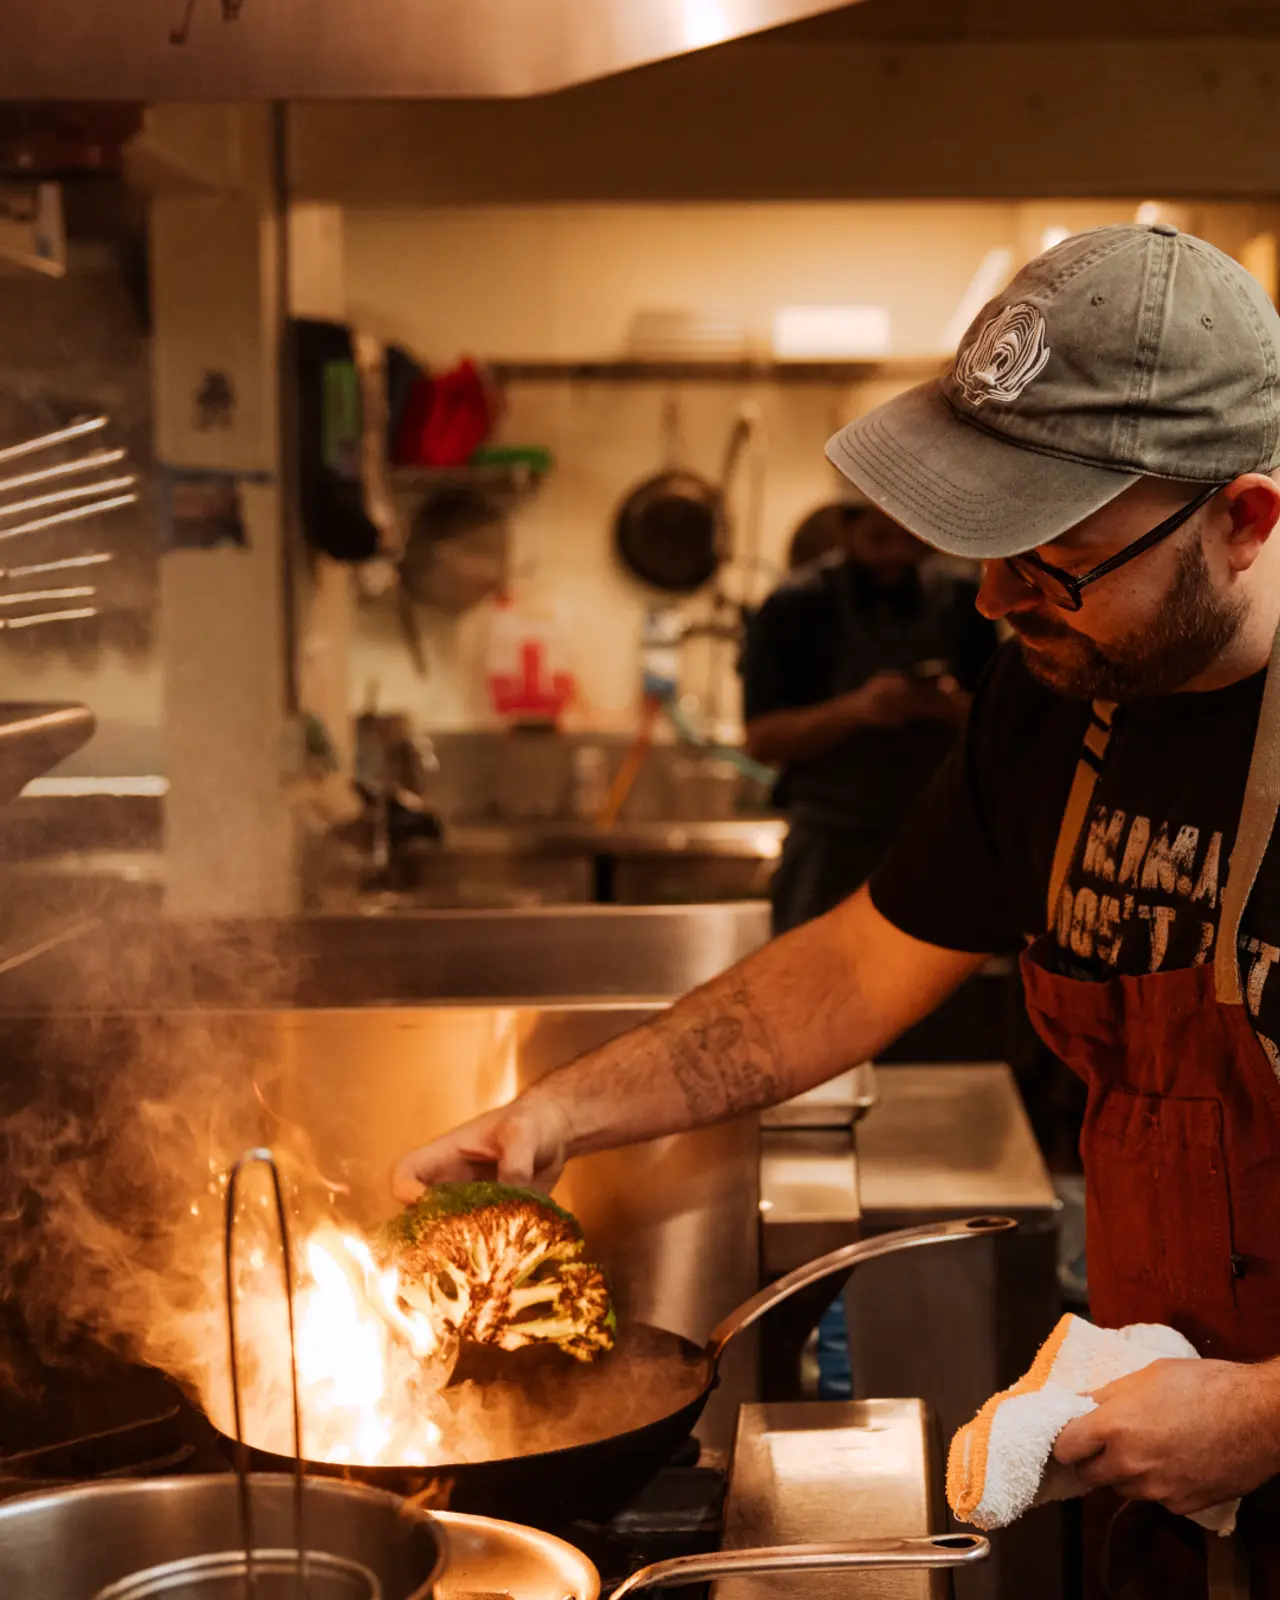 A chef wearing a baseball cap and an apron attentively cooks with a flaming pan in a bustling kitchen environment.